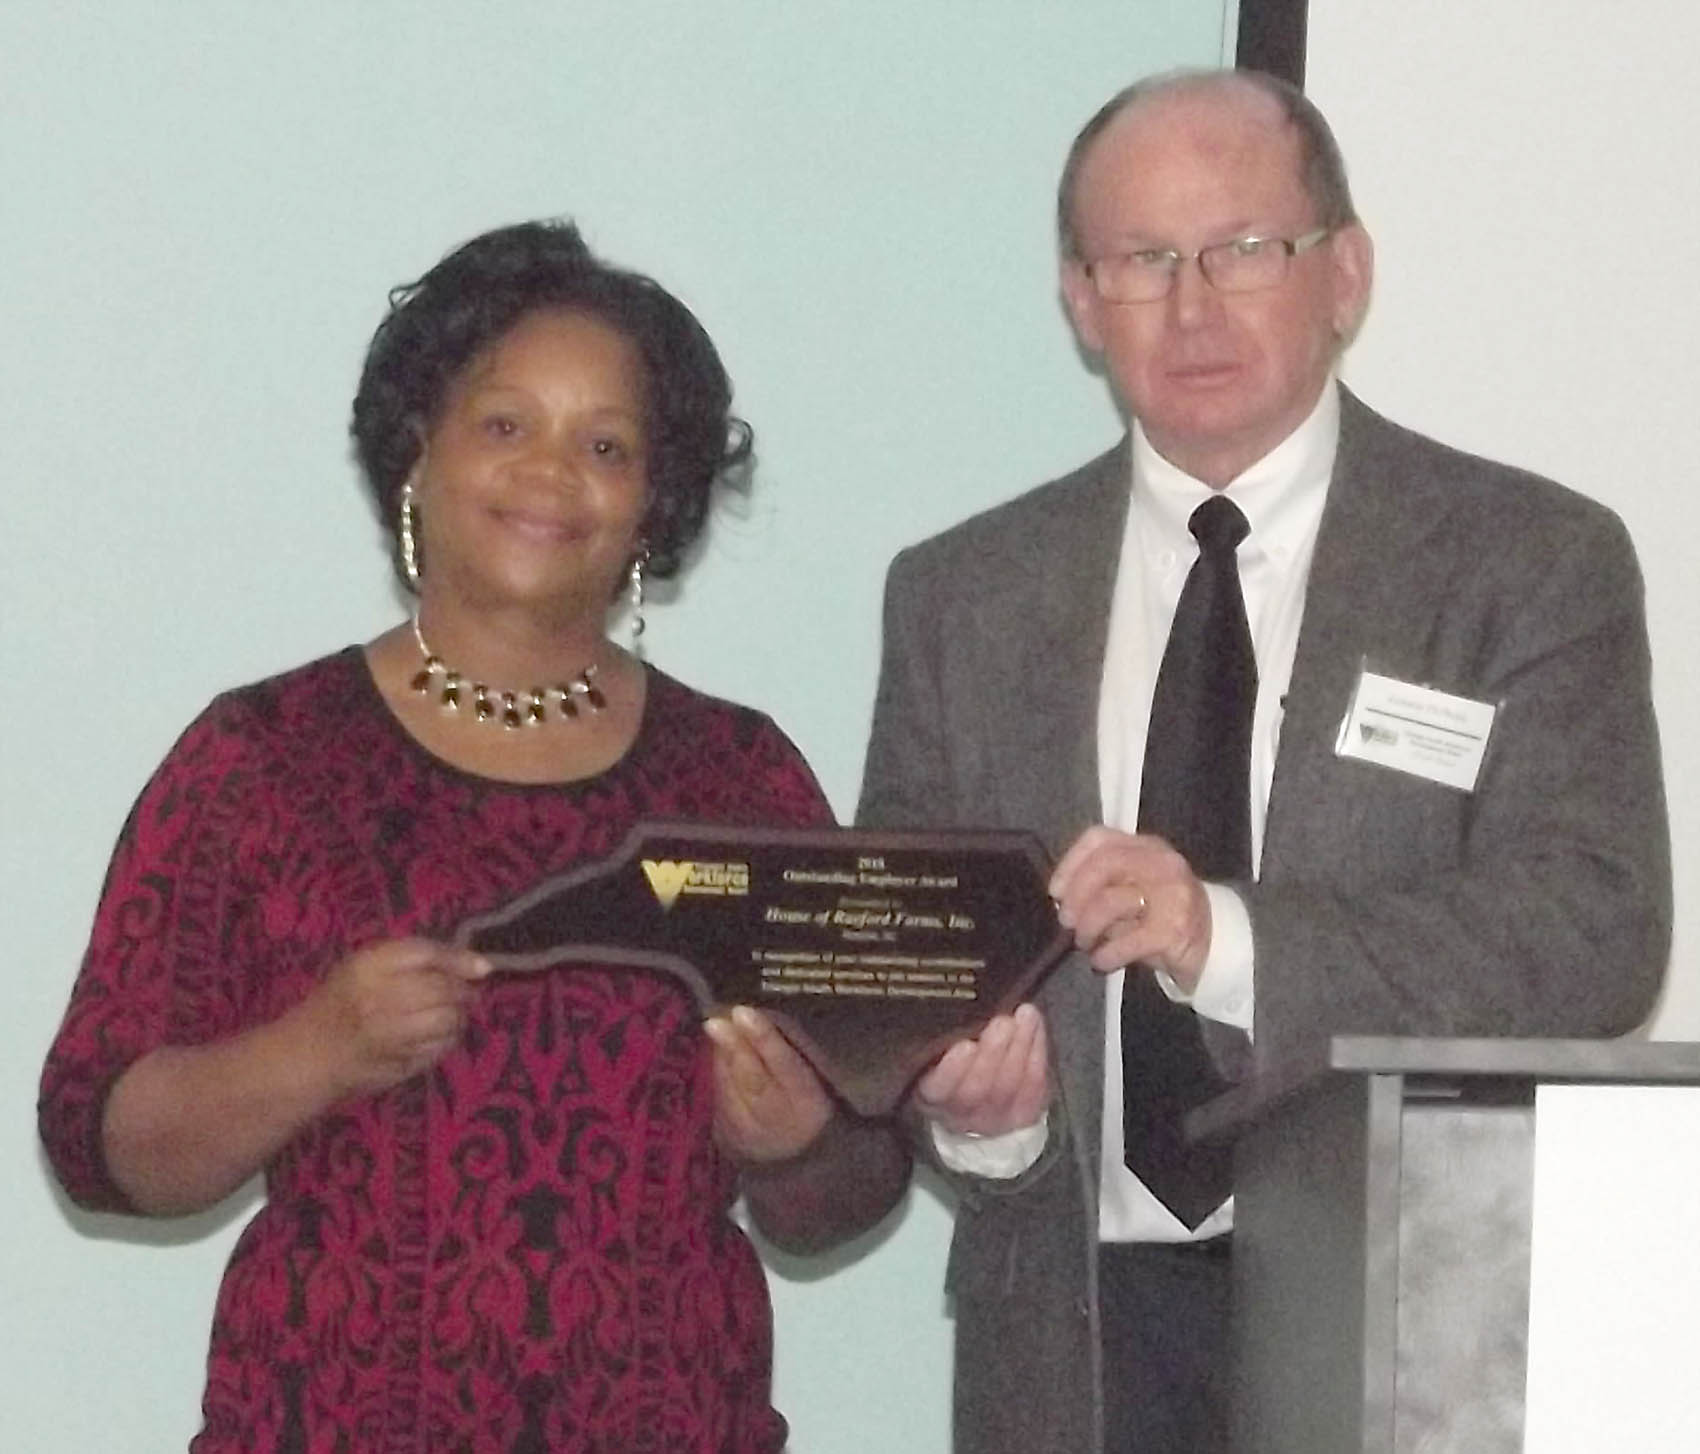 Click to enlarge,  House of Raeford Farms, Inc., received the Outstanding Employer Award at the 7th Annual Triangle South Workforce Development Board (TSWDB) Awards Banquet held Wednesday, Dec. 5, at the Central Carolina Community College Harnett Health Sciences Center in Lillington. Sandra Webster (left), NCWorks Career Center Manager - Sampson County, received the award on behalf of House of Raeford Farms, Inc. Presenting the award was Lonnie McPhail, TSWDB Member. 